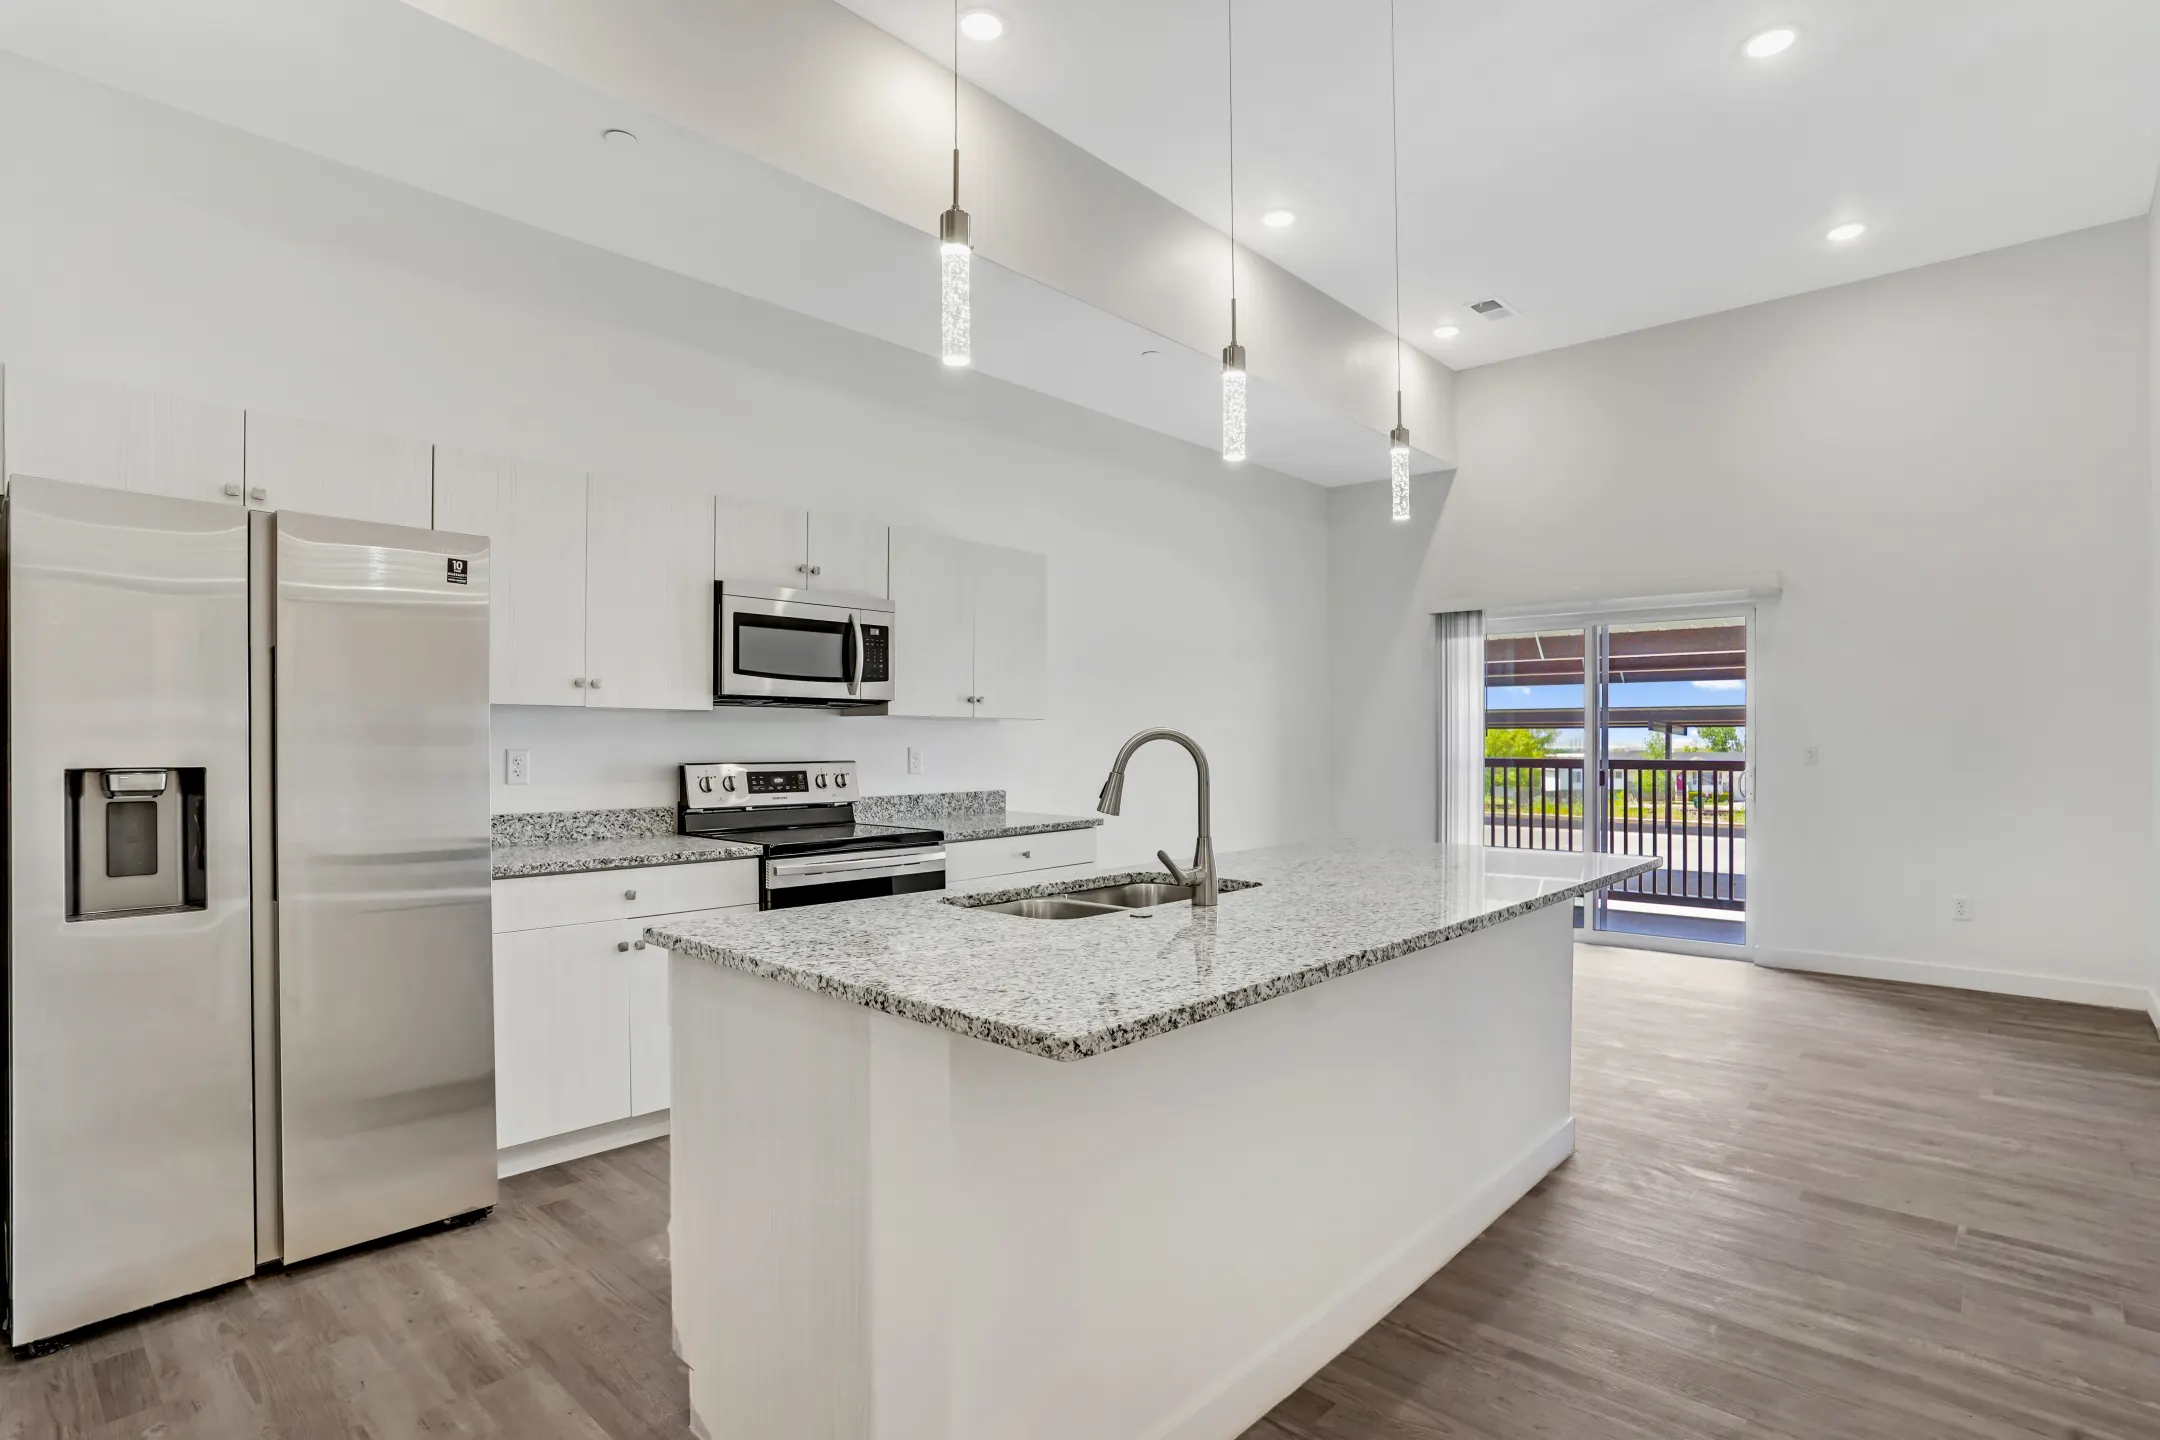 Kitchen - Clearfield Junction Apartments - Clearfield, UT